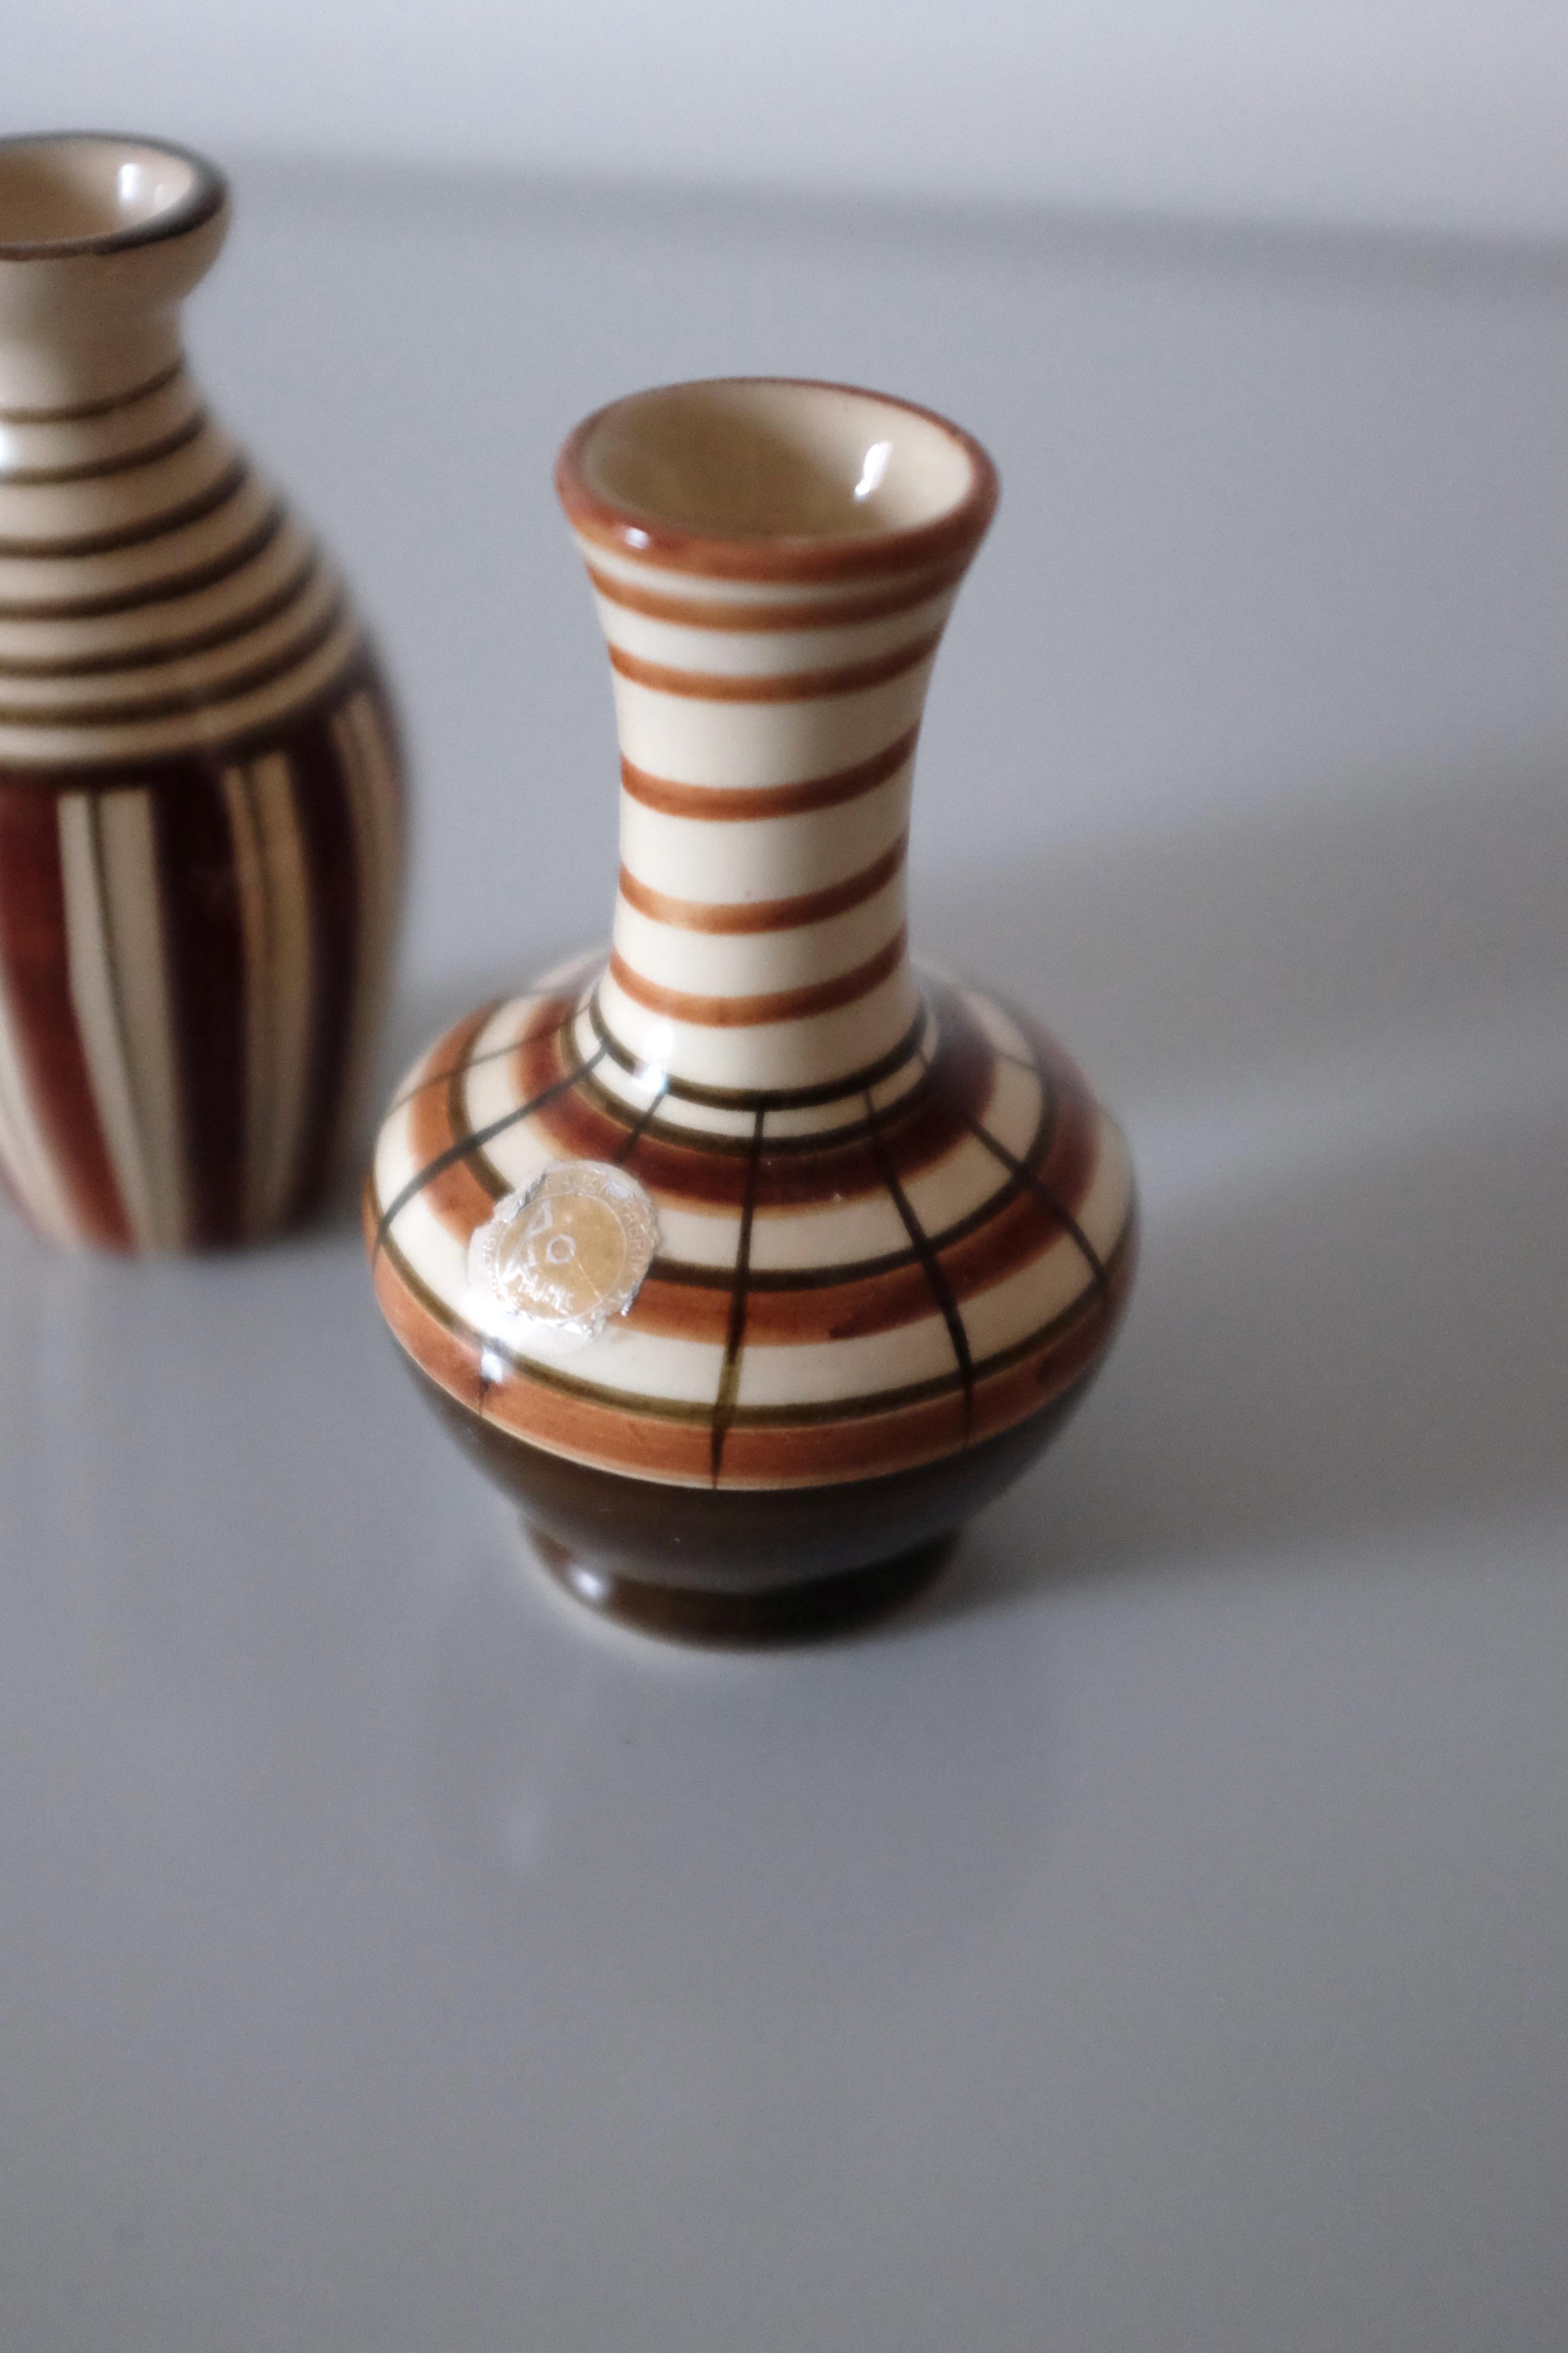 Charming pair of of ceramic miniatures by Eva Jancke-Björk for Bo Fajans, Sweden. They are part of a collection miniature objects that Eva Jancke-Björk created for Bo Fajans and typical for her signature round and soft lined design. Both carries